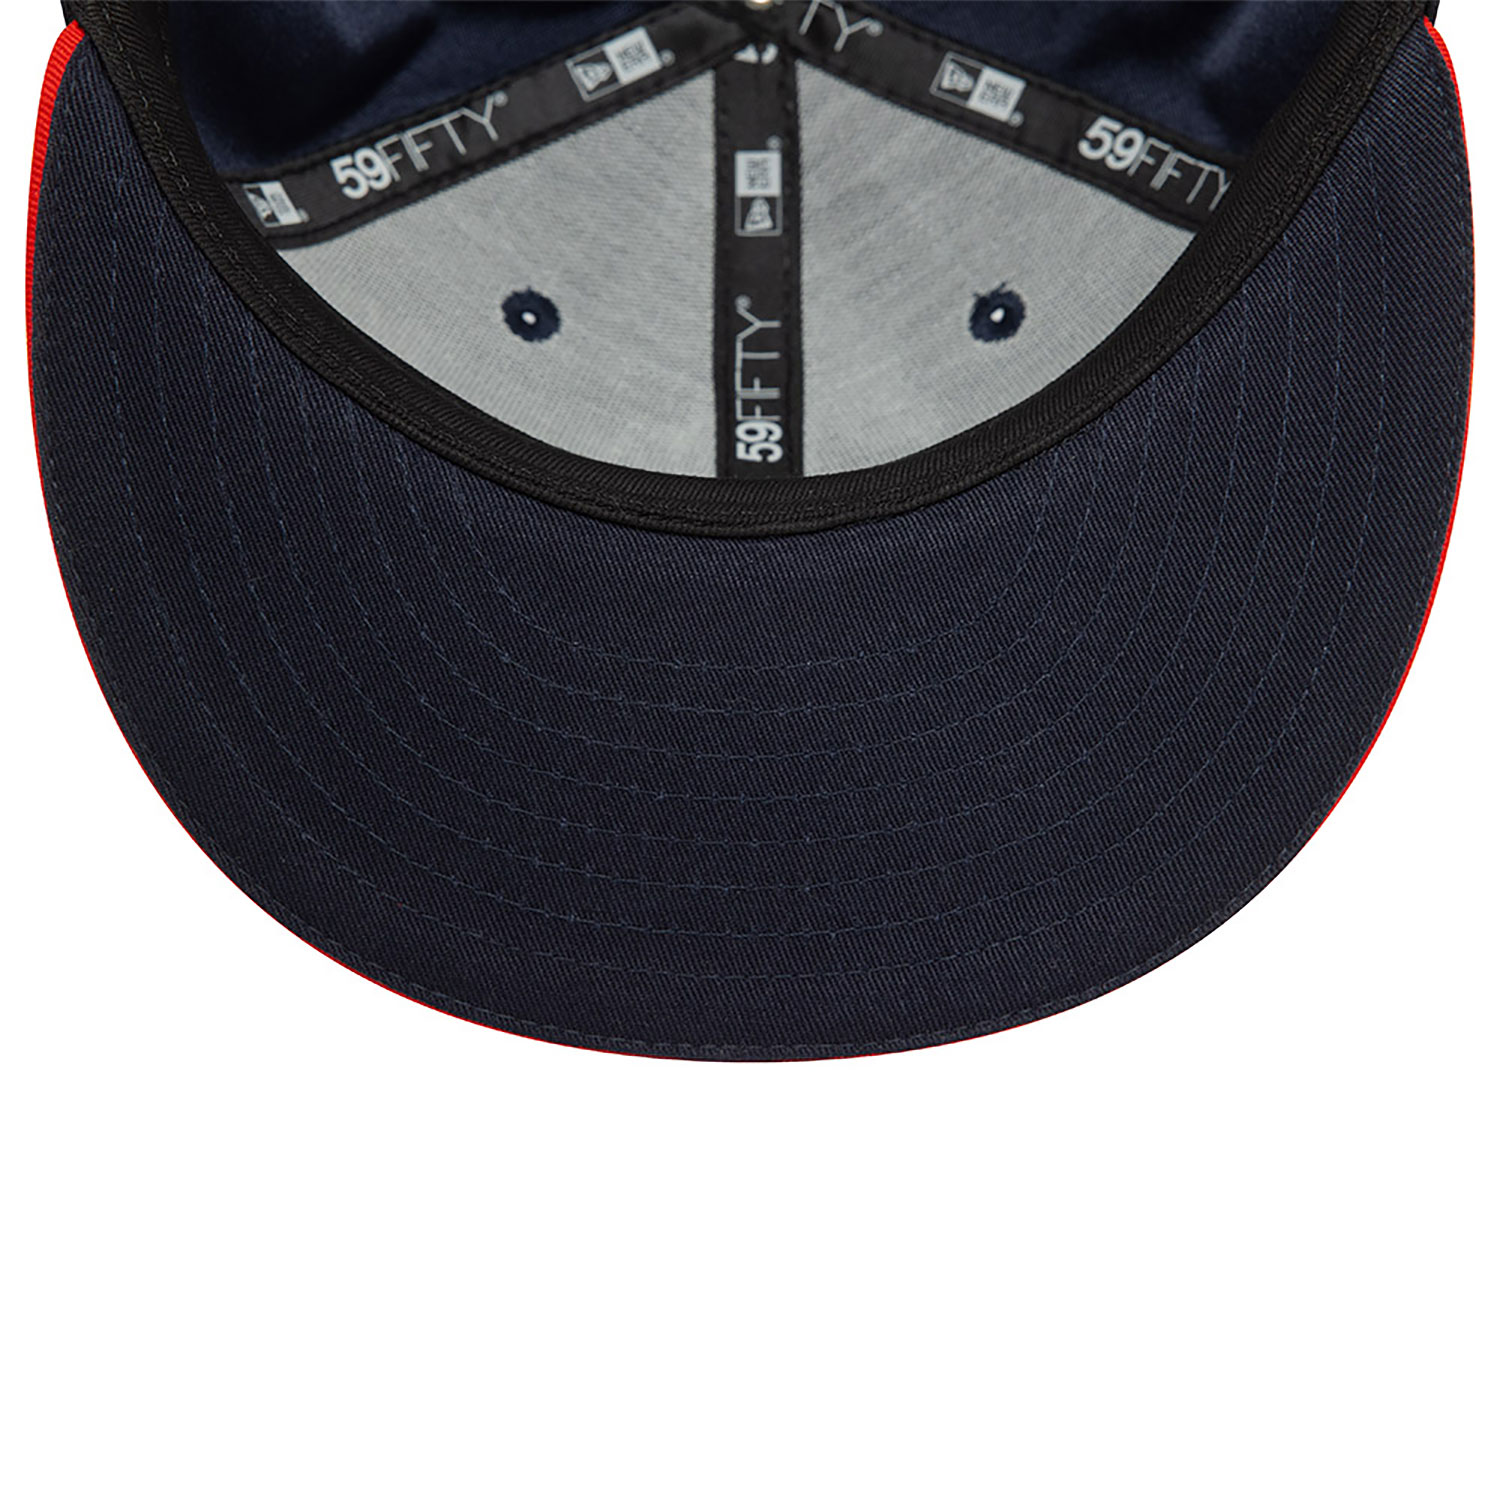 Red Bull Racing Navy 59FIFTY Fitted Cap